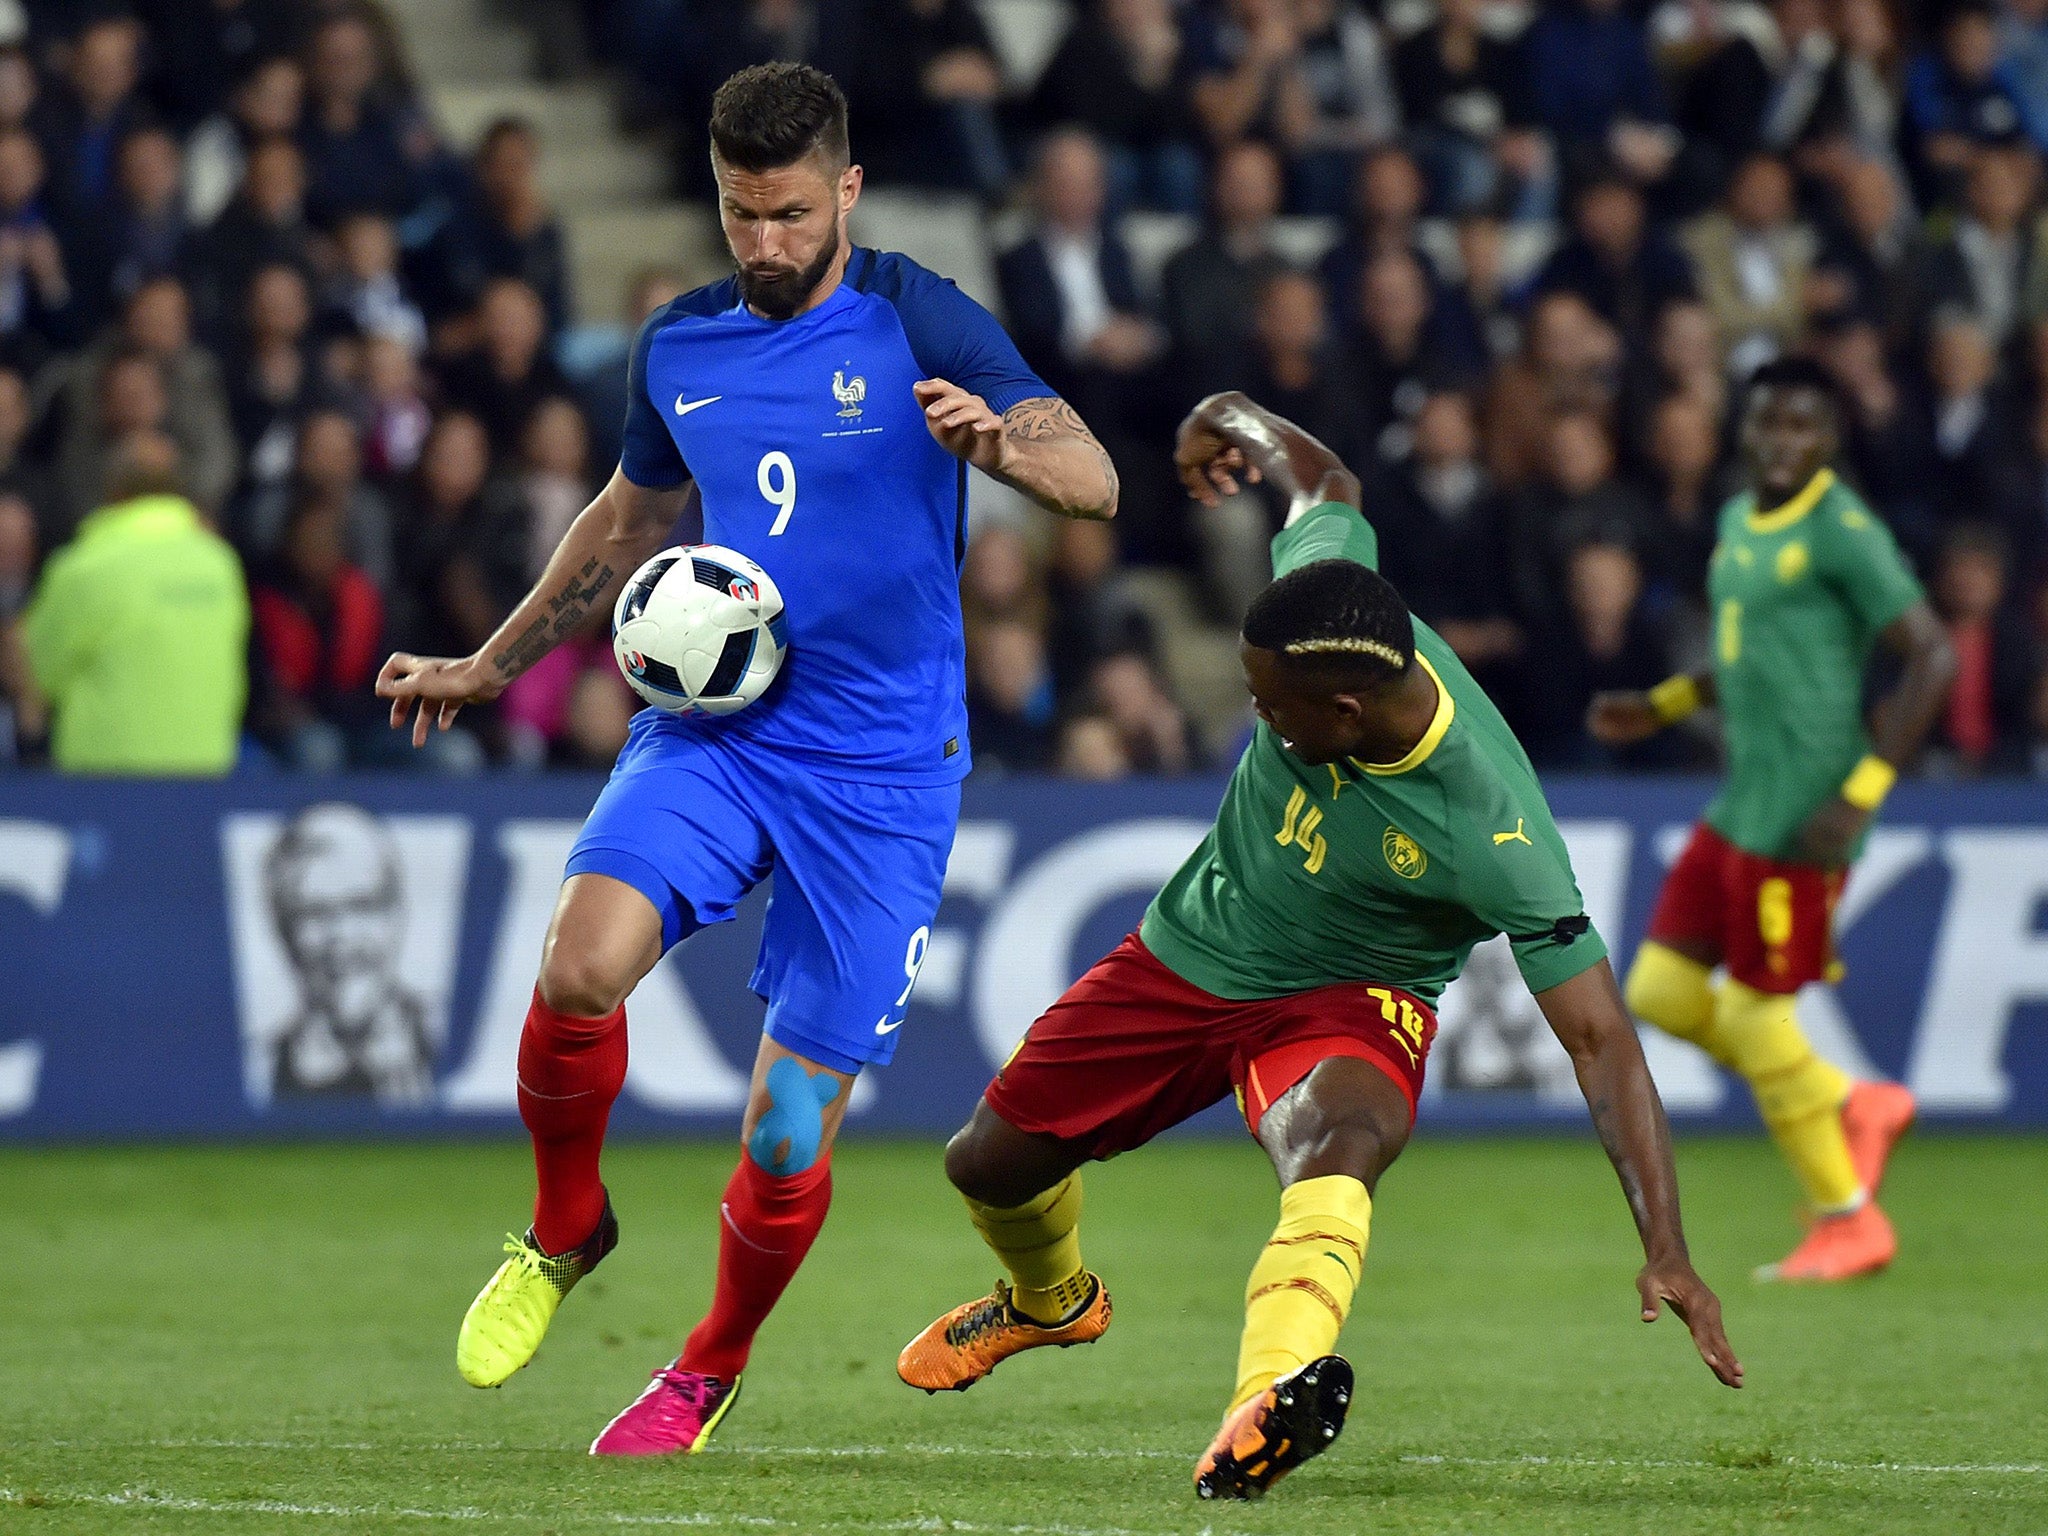 Olivier Giroud scored for France but still attracted criticism